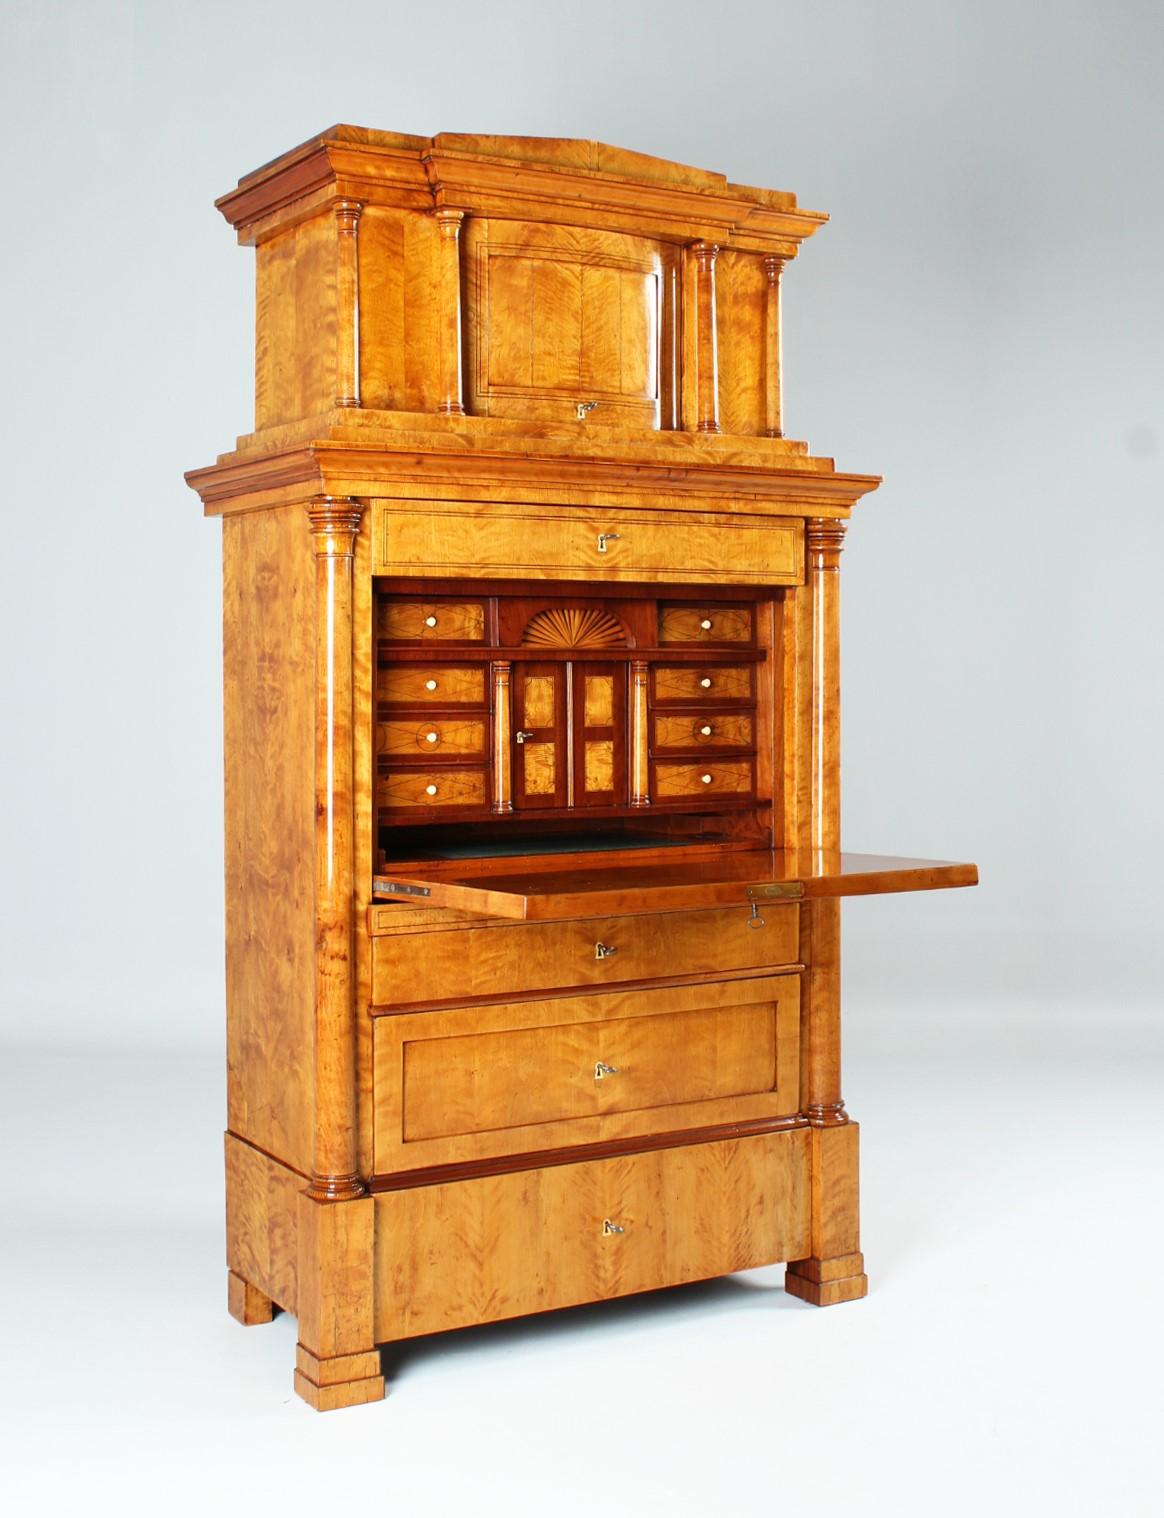 Biedermeier secretaire with beautiful patina

Brunswick - Berlin
Birch
Biedermeier around 1830

Dimensions: H x W x D: 200 x 110 x 54 cm

Description:
Architecturally constructed writing furniture of absolutely masterful quality.

On